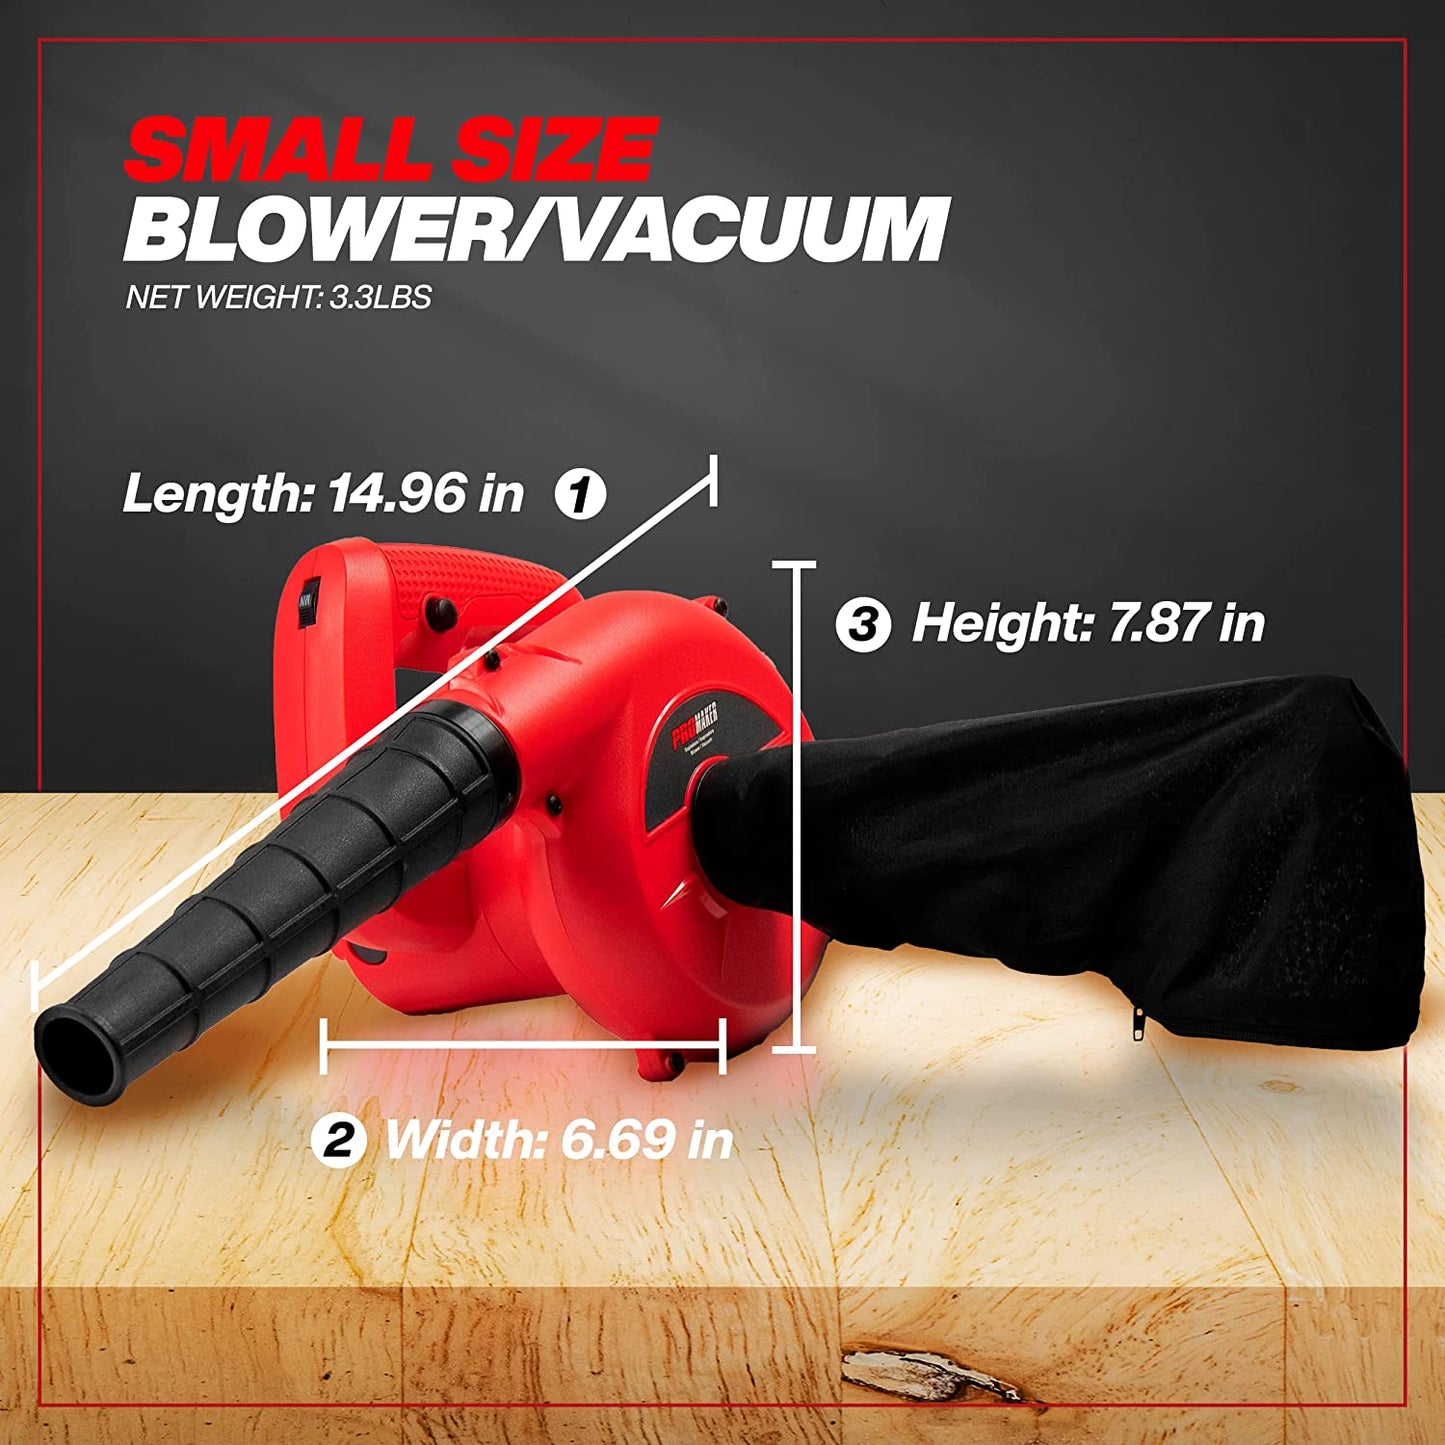 Corded Electric Leaf Blower, Small Blower/Vacuum for Patio with a Variable Speed (7 Levels of Speed) 6000-14000 R/Min, 2 in 1, Includes a Dust Bag, Snow/Leaf/Dusting 400W 120V PRO-SP400.